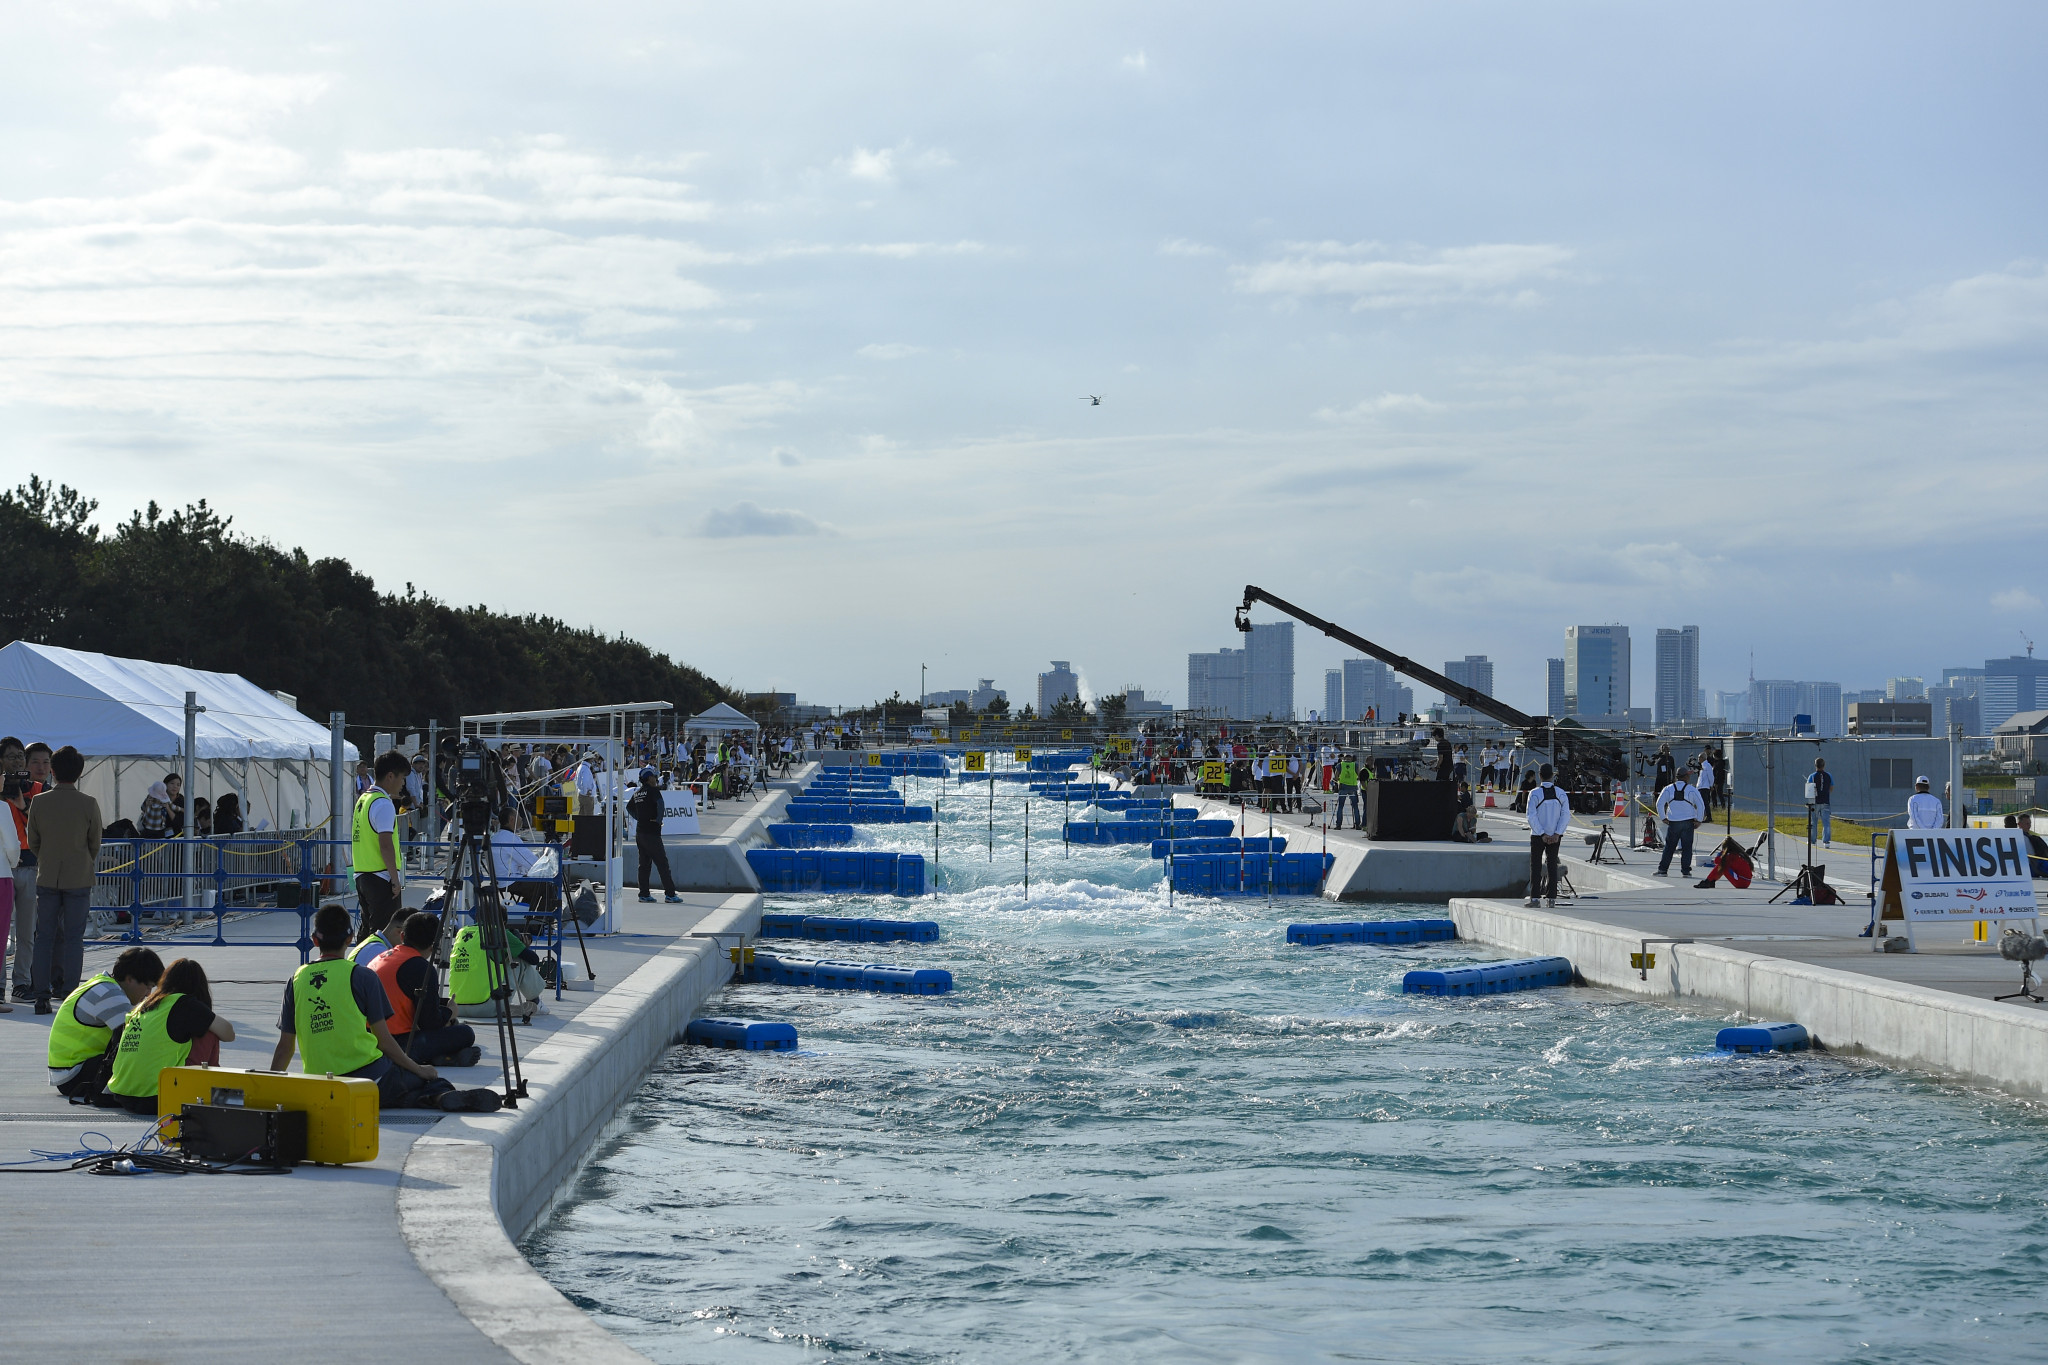 The Kasai Canoe Slalom Centre is due to host Tokyo 2020 action from July 26 to 31 ©Getty Images